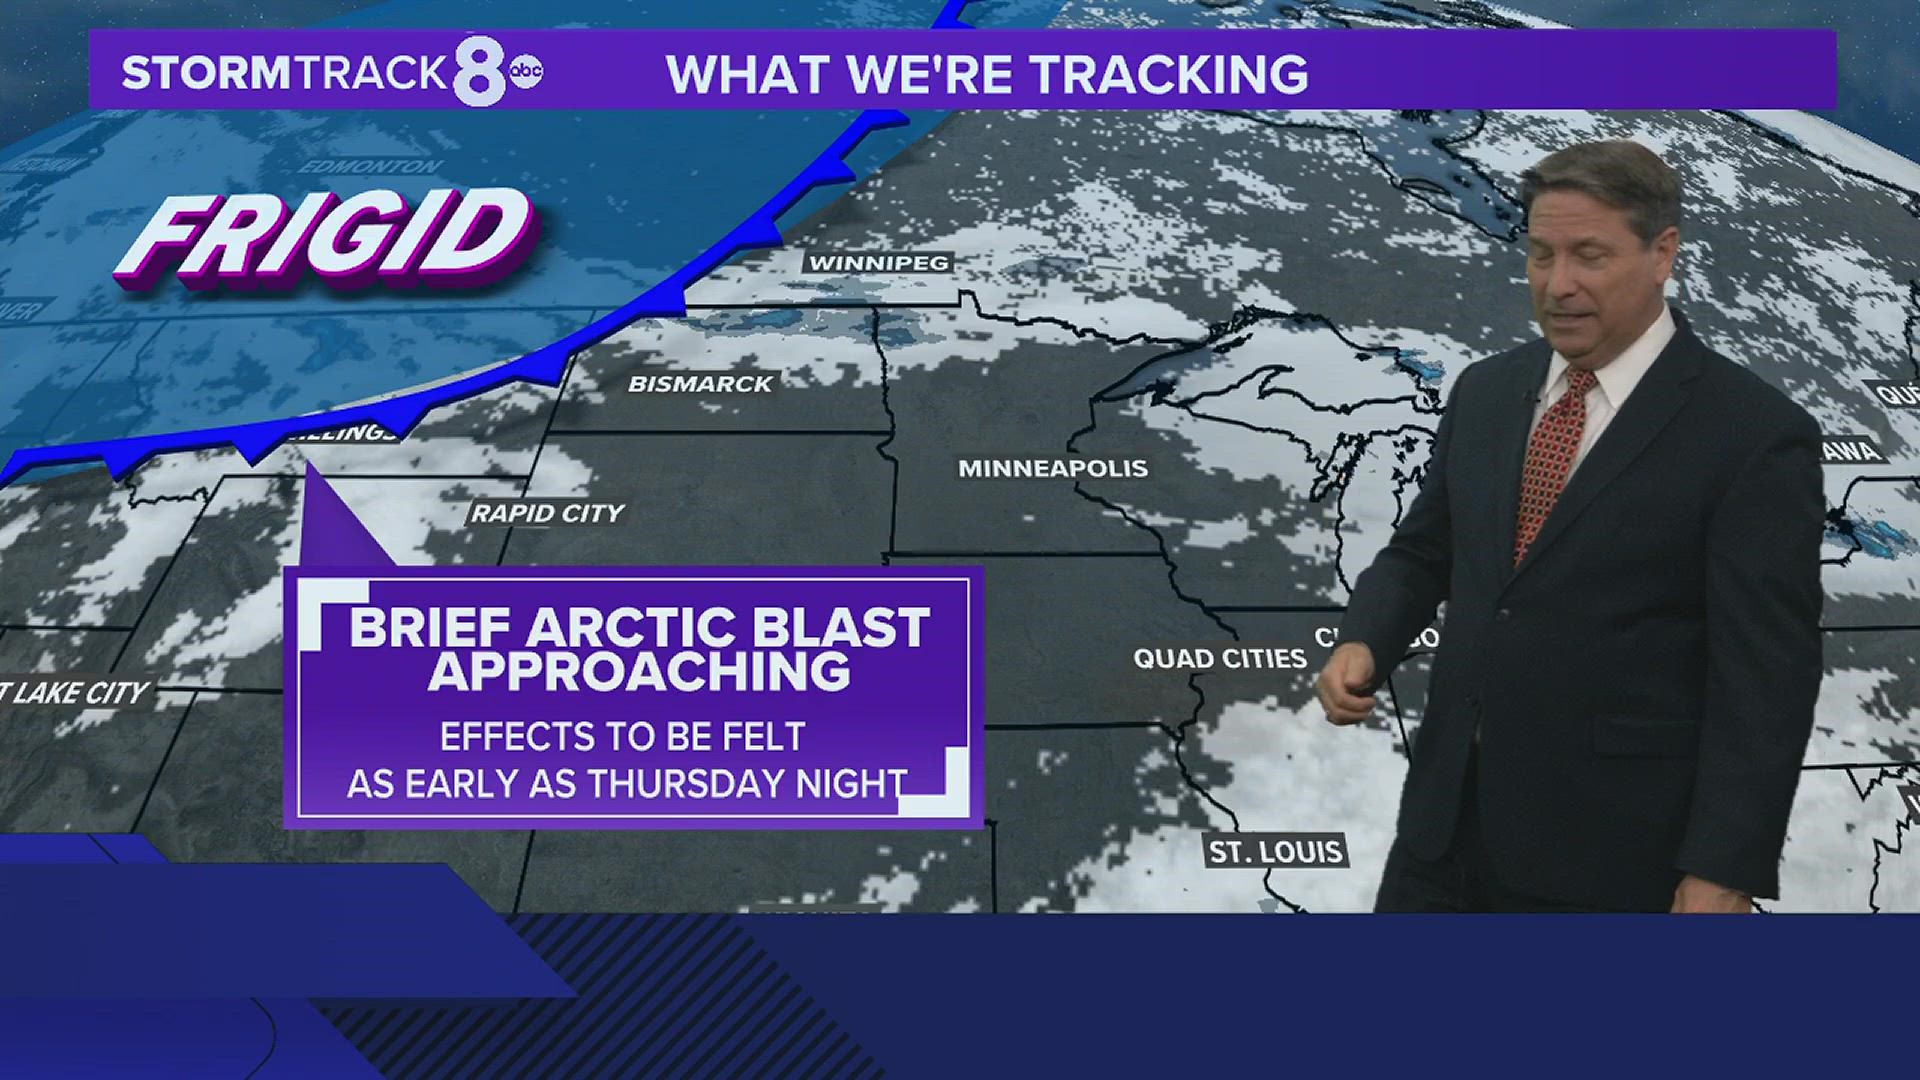 Sharp arctic front approaching... Frigid temperatures as early as Thursday night